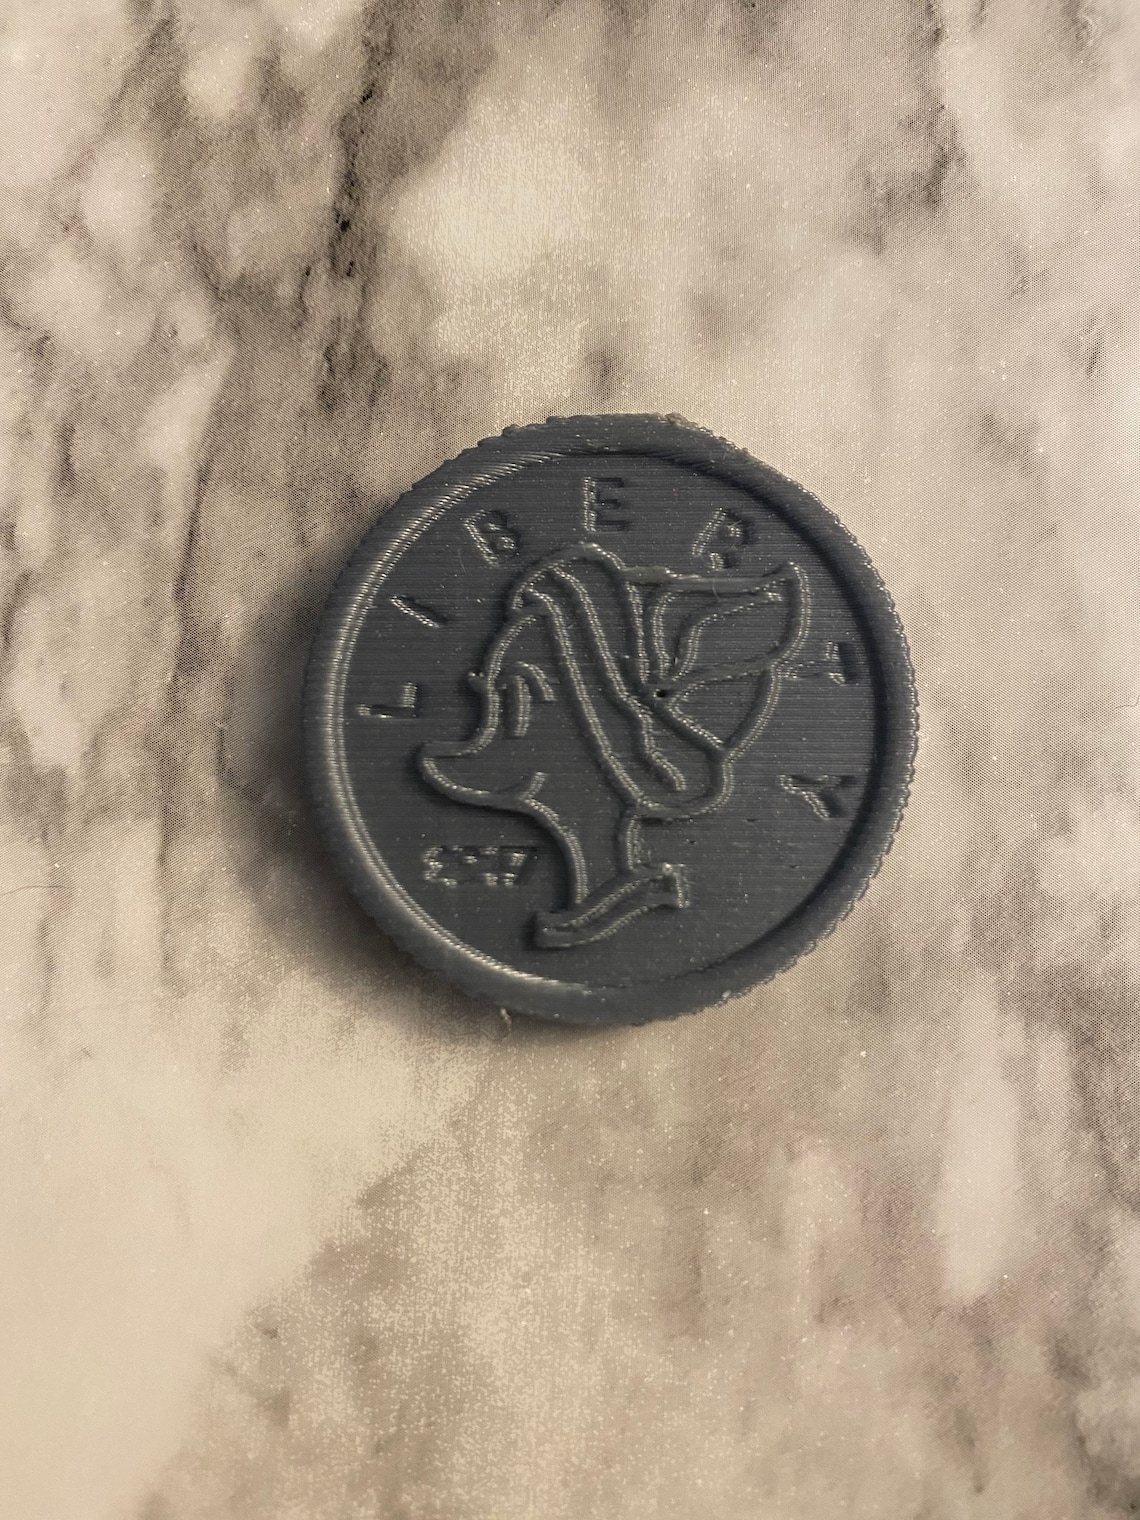 3D Printed Scrooge McDuck Lucky Dime | Etsy